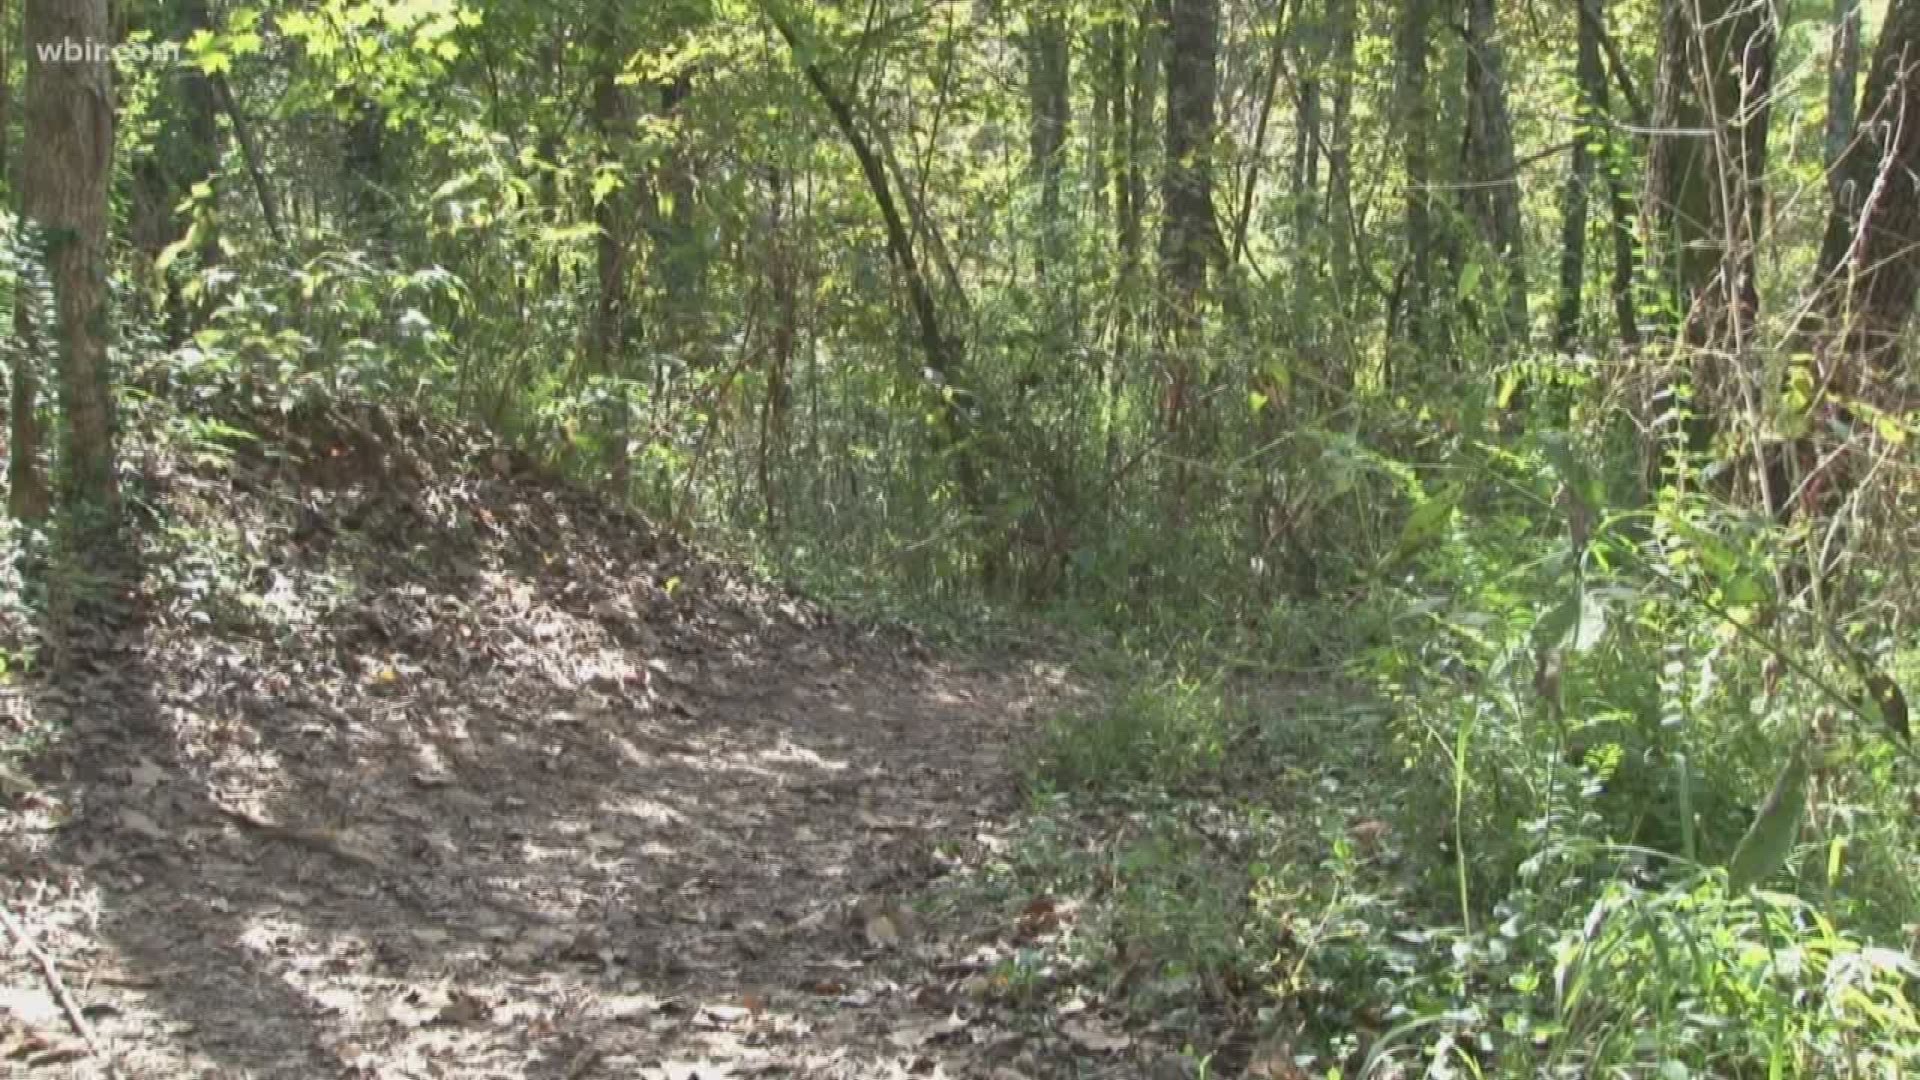 They've gathered $200,000 to build a new park in Powell. They're also adding benches to parks, building a unique playground at Ijams, and partnering with Oak Ridge, Anderson County and Roane County to improve green spaces there.